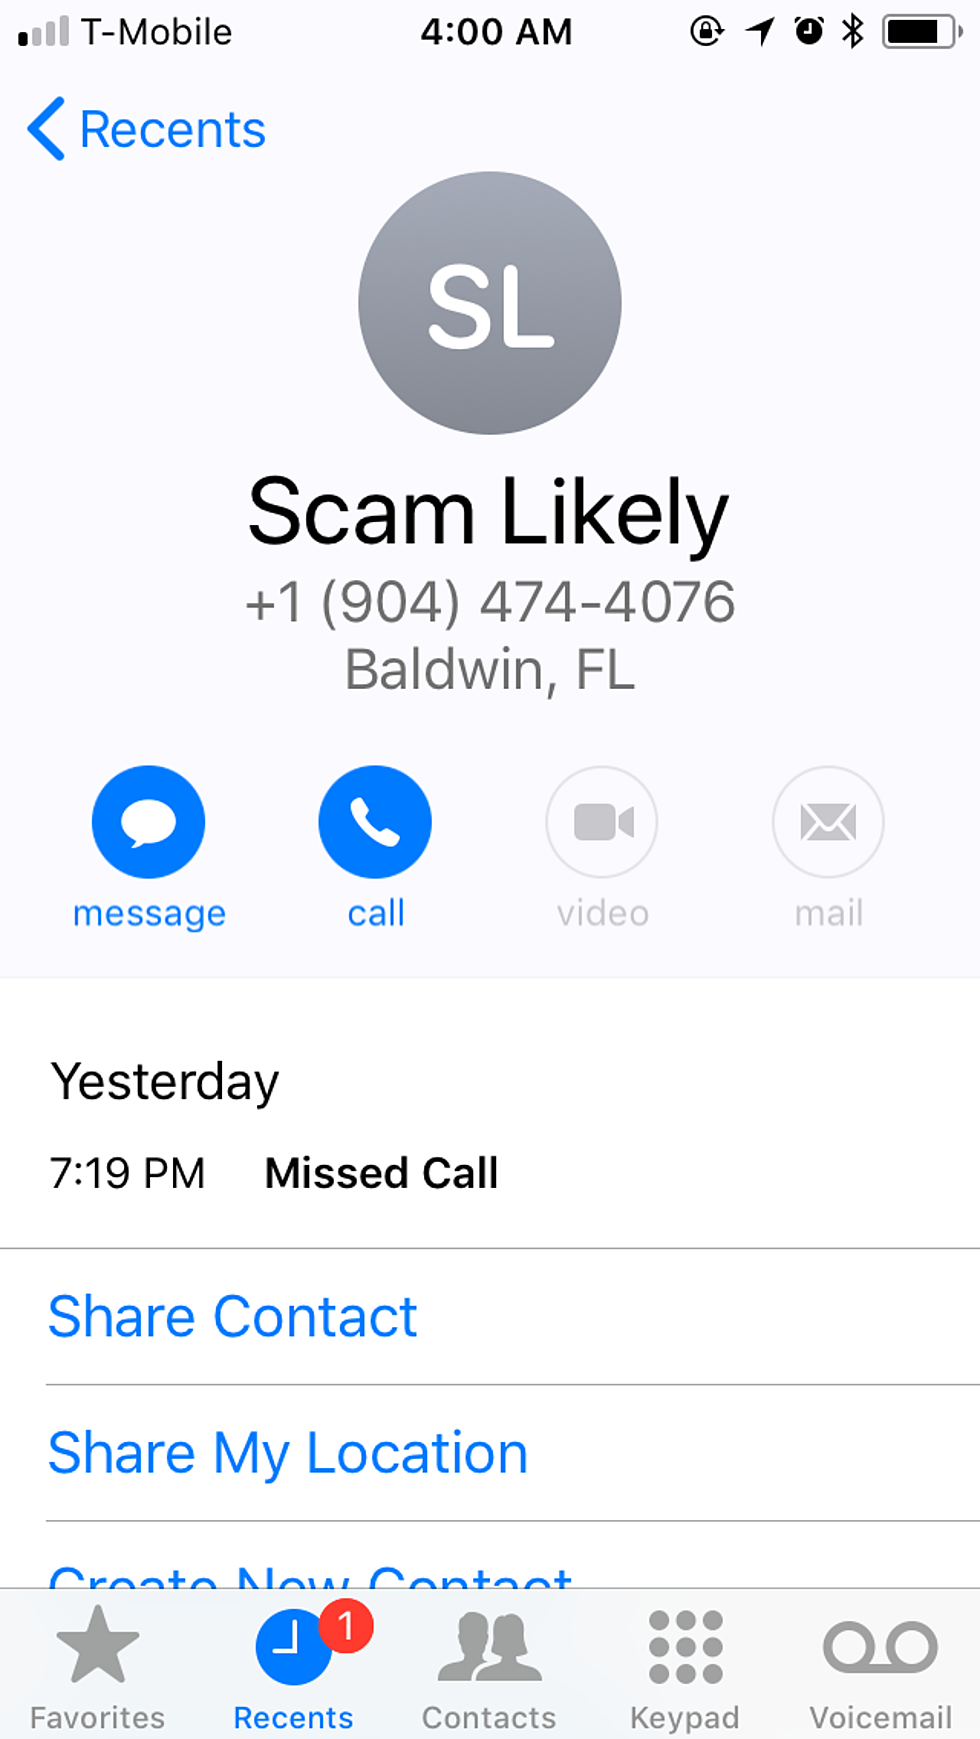 Has Your Friend “Scam Likely” Been Calling You Too?